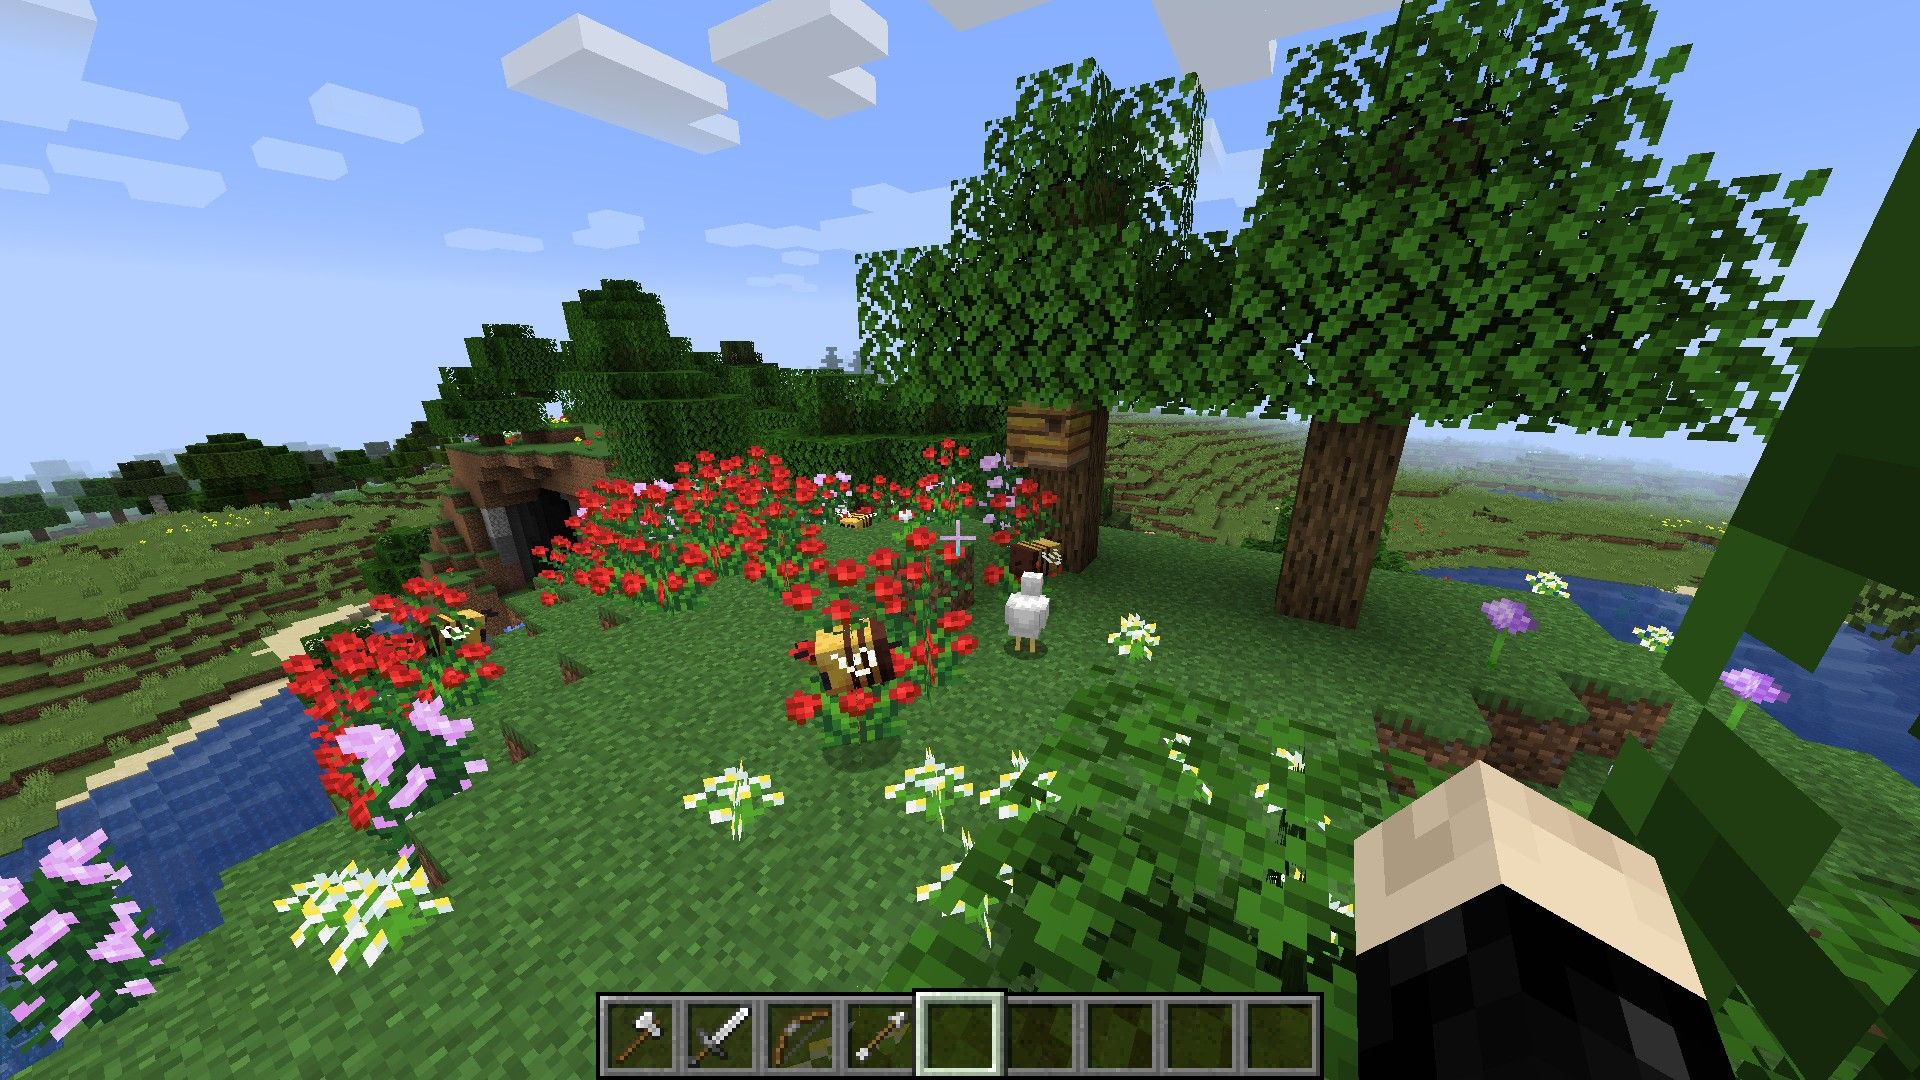 Do you hear an odd buzzing sound? Minecraft 1.15 is out with a new